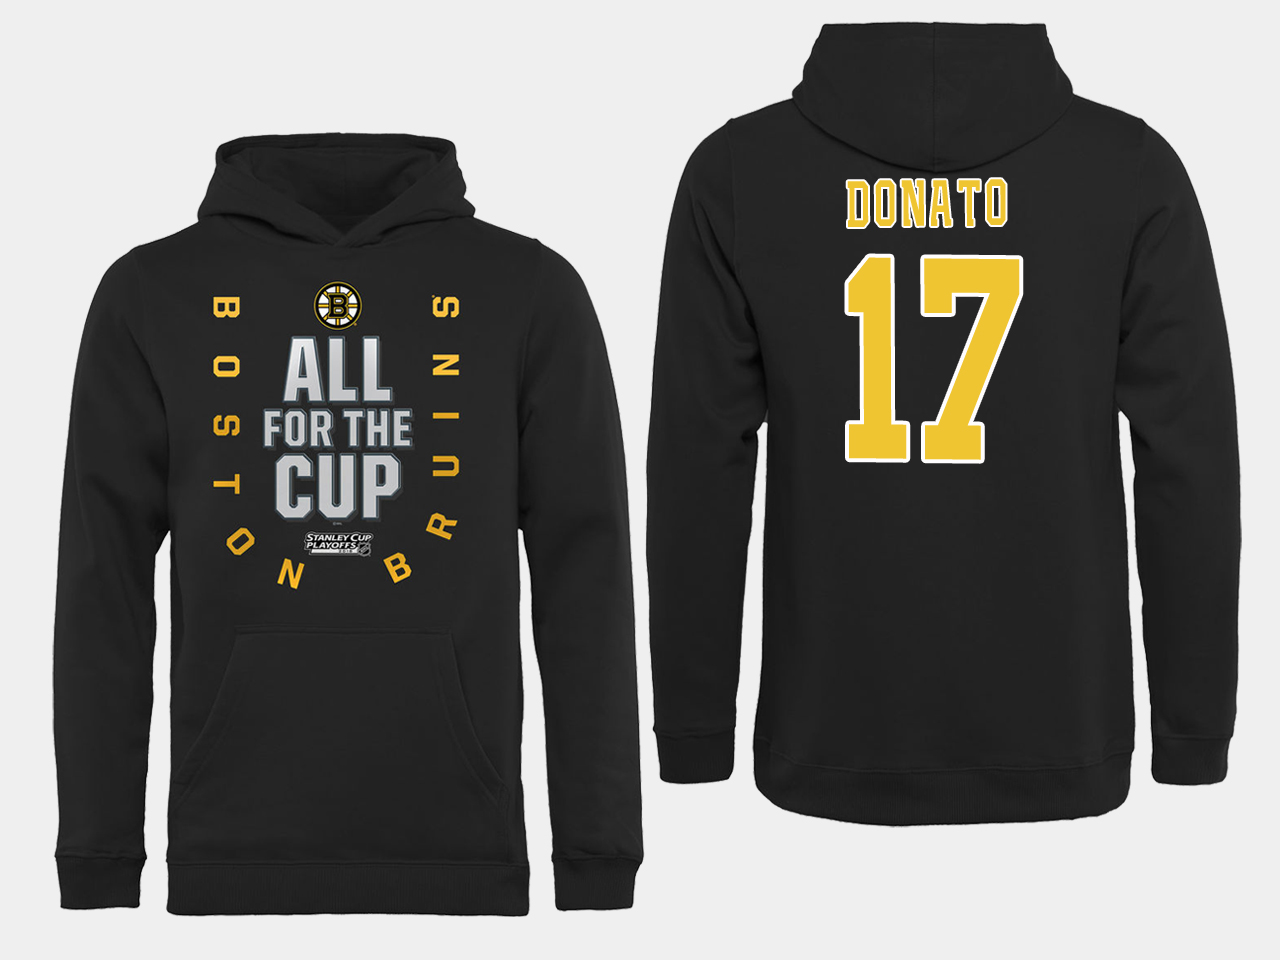 NHL Men Boston Bruins 17 Donato Black All for the Cup Hoodie